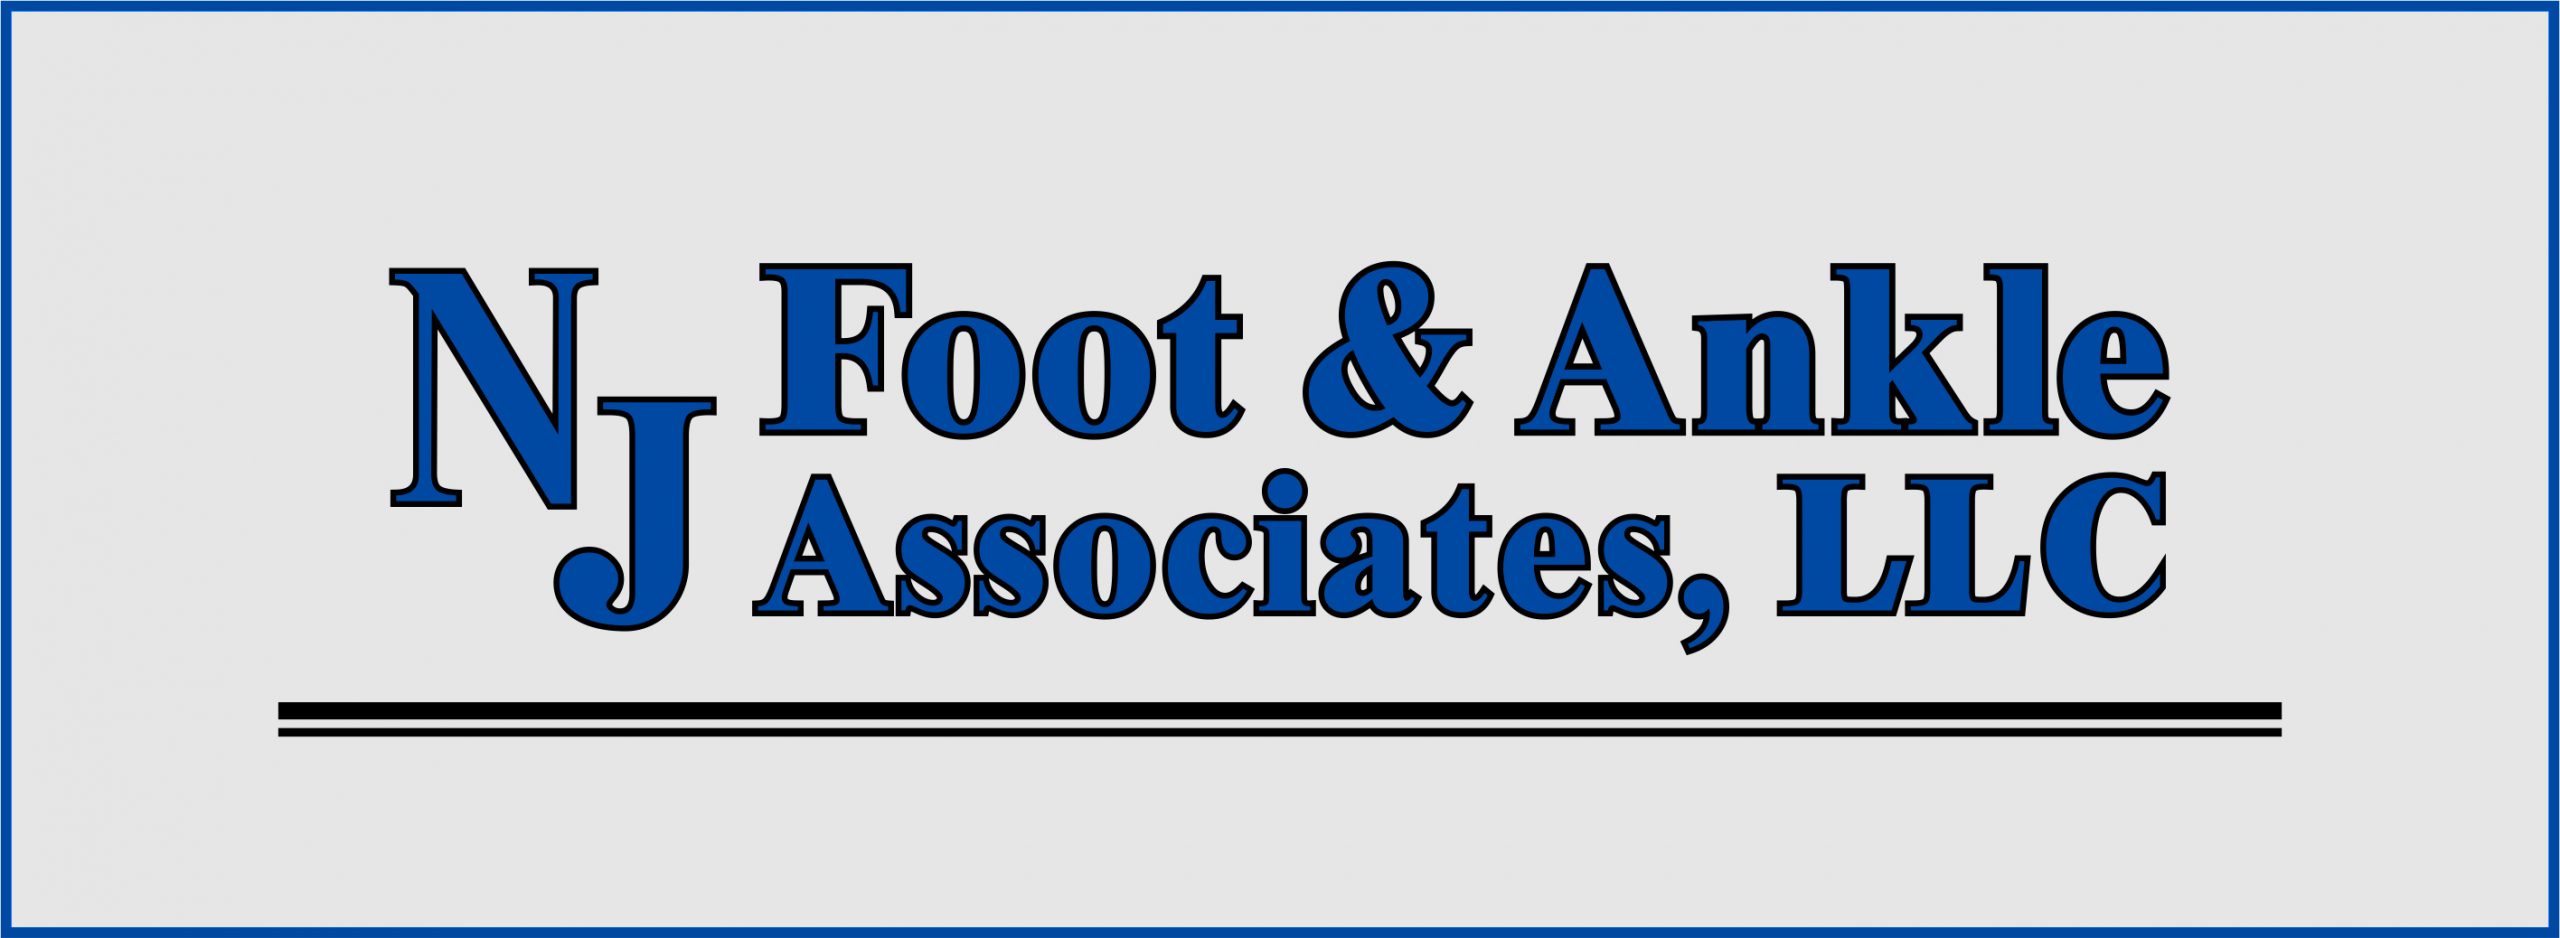 New Jersey Foot and Ankle Associates, LLC